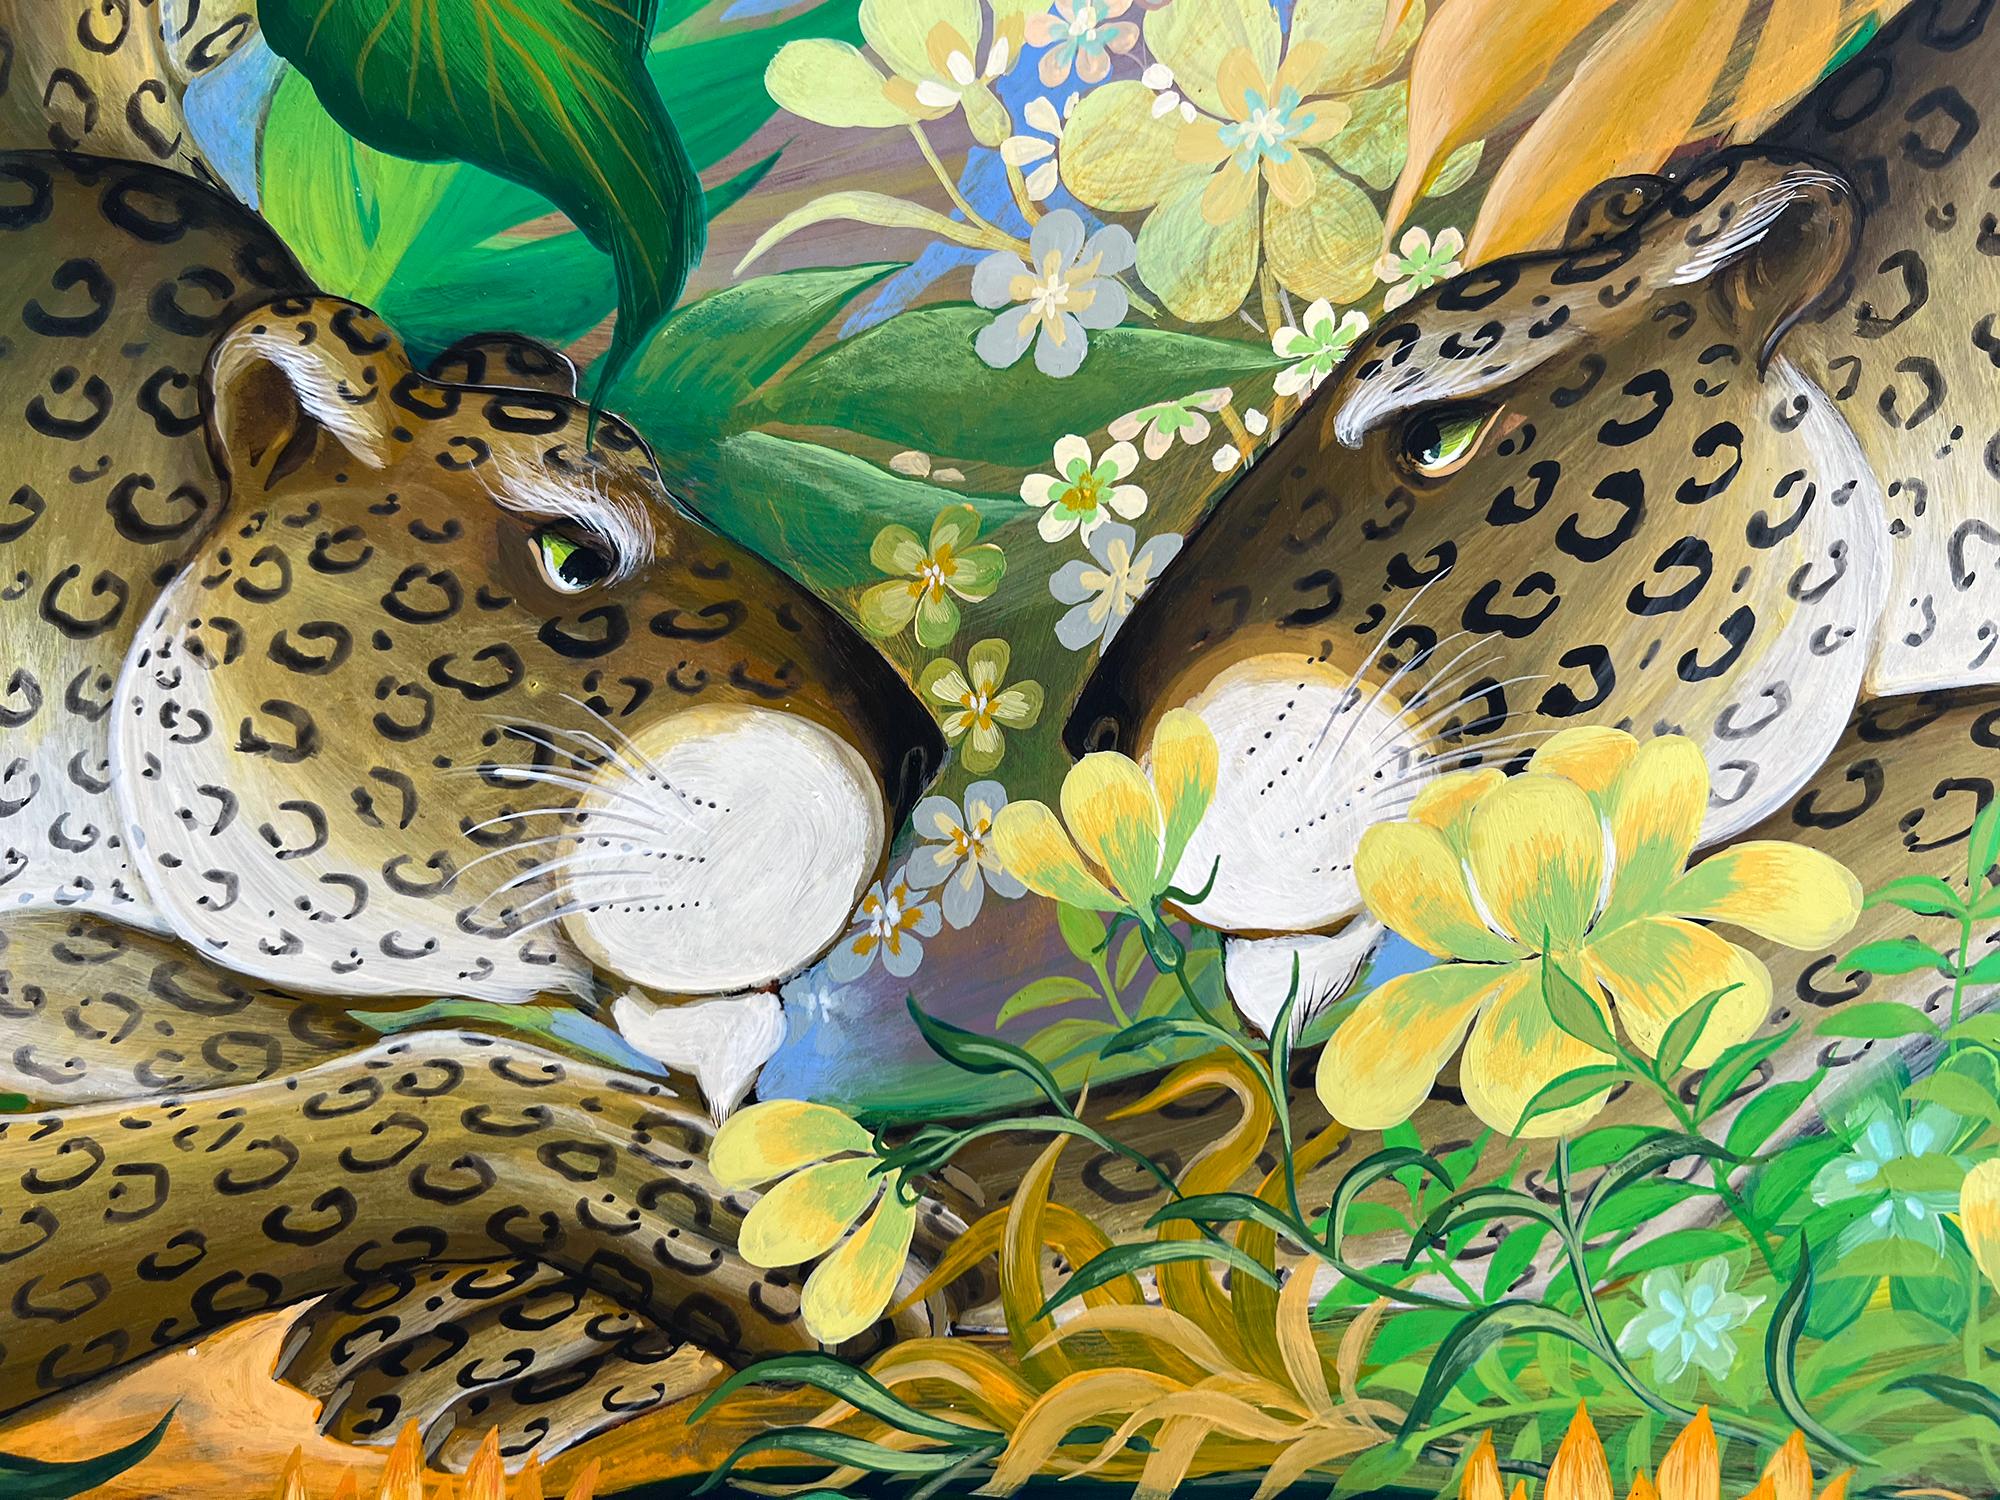 Two Leopards in Reflection Pool  in a Fantasy Tropical Garden Naive Art - Painting by Gustavo Novoa